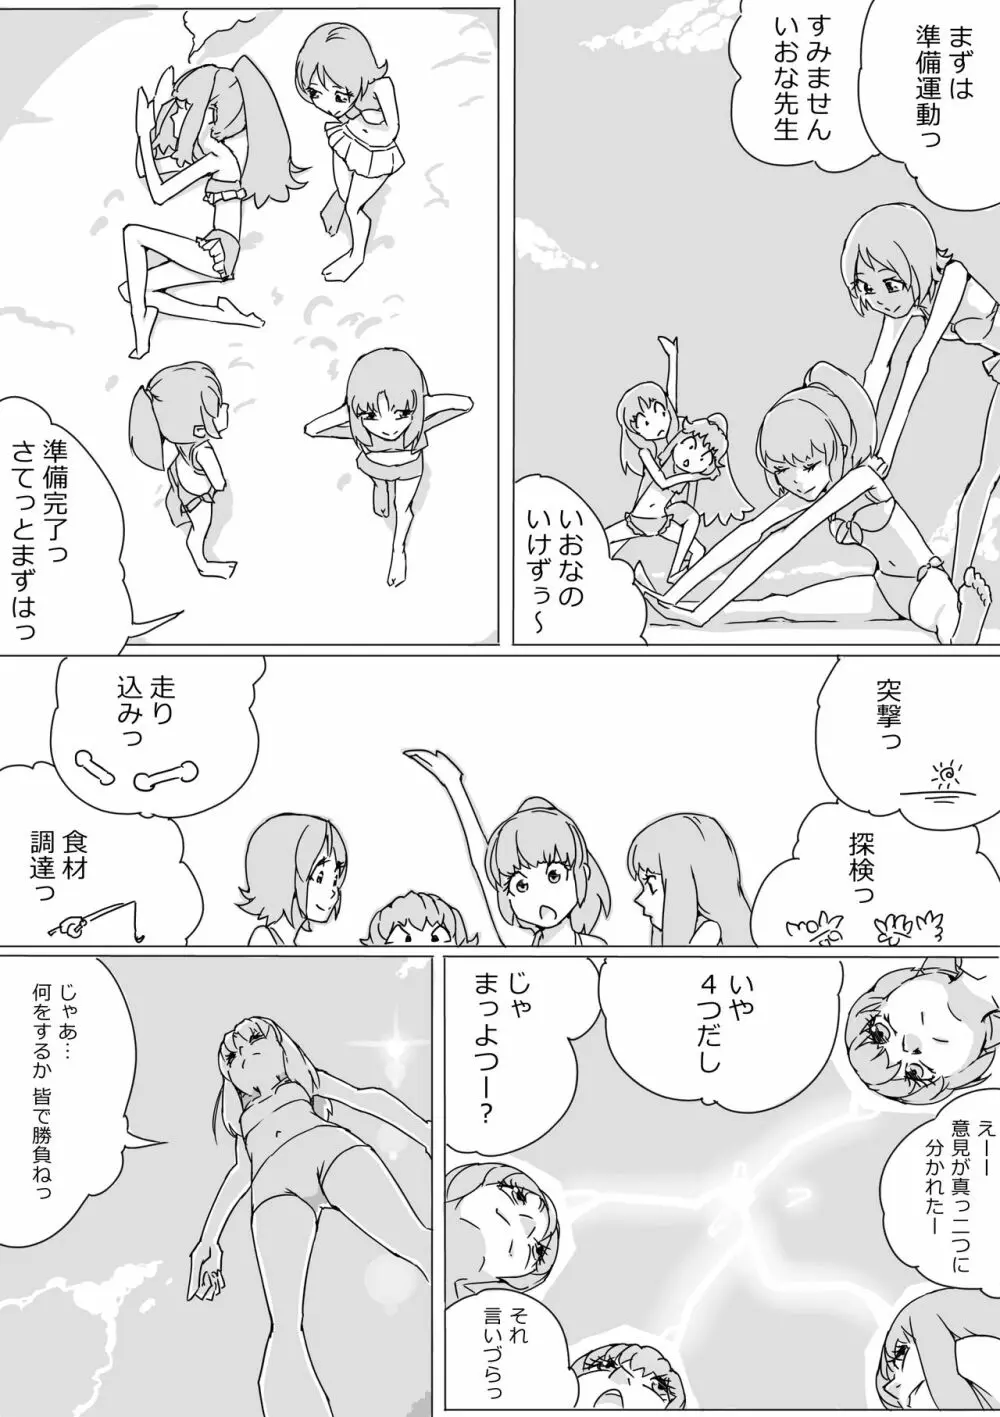 Untitled Precure Doujinshi 201709 - page3